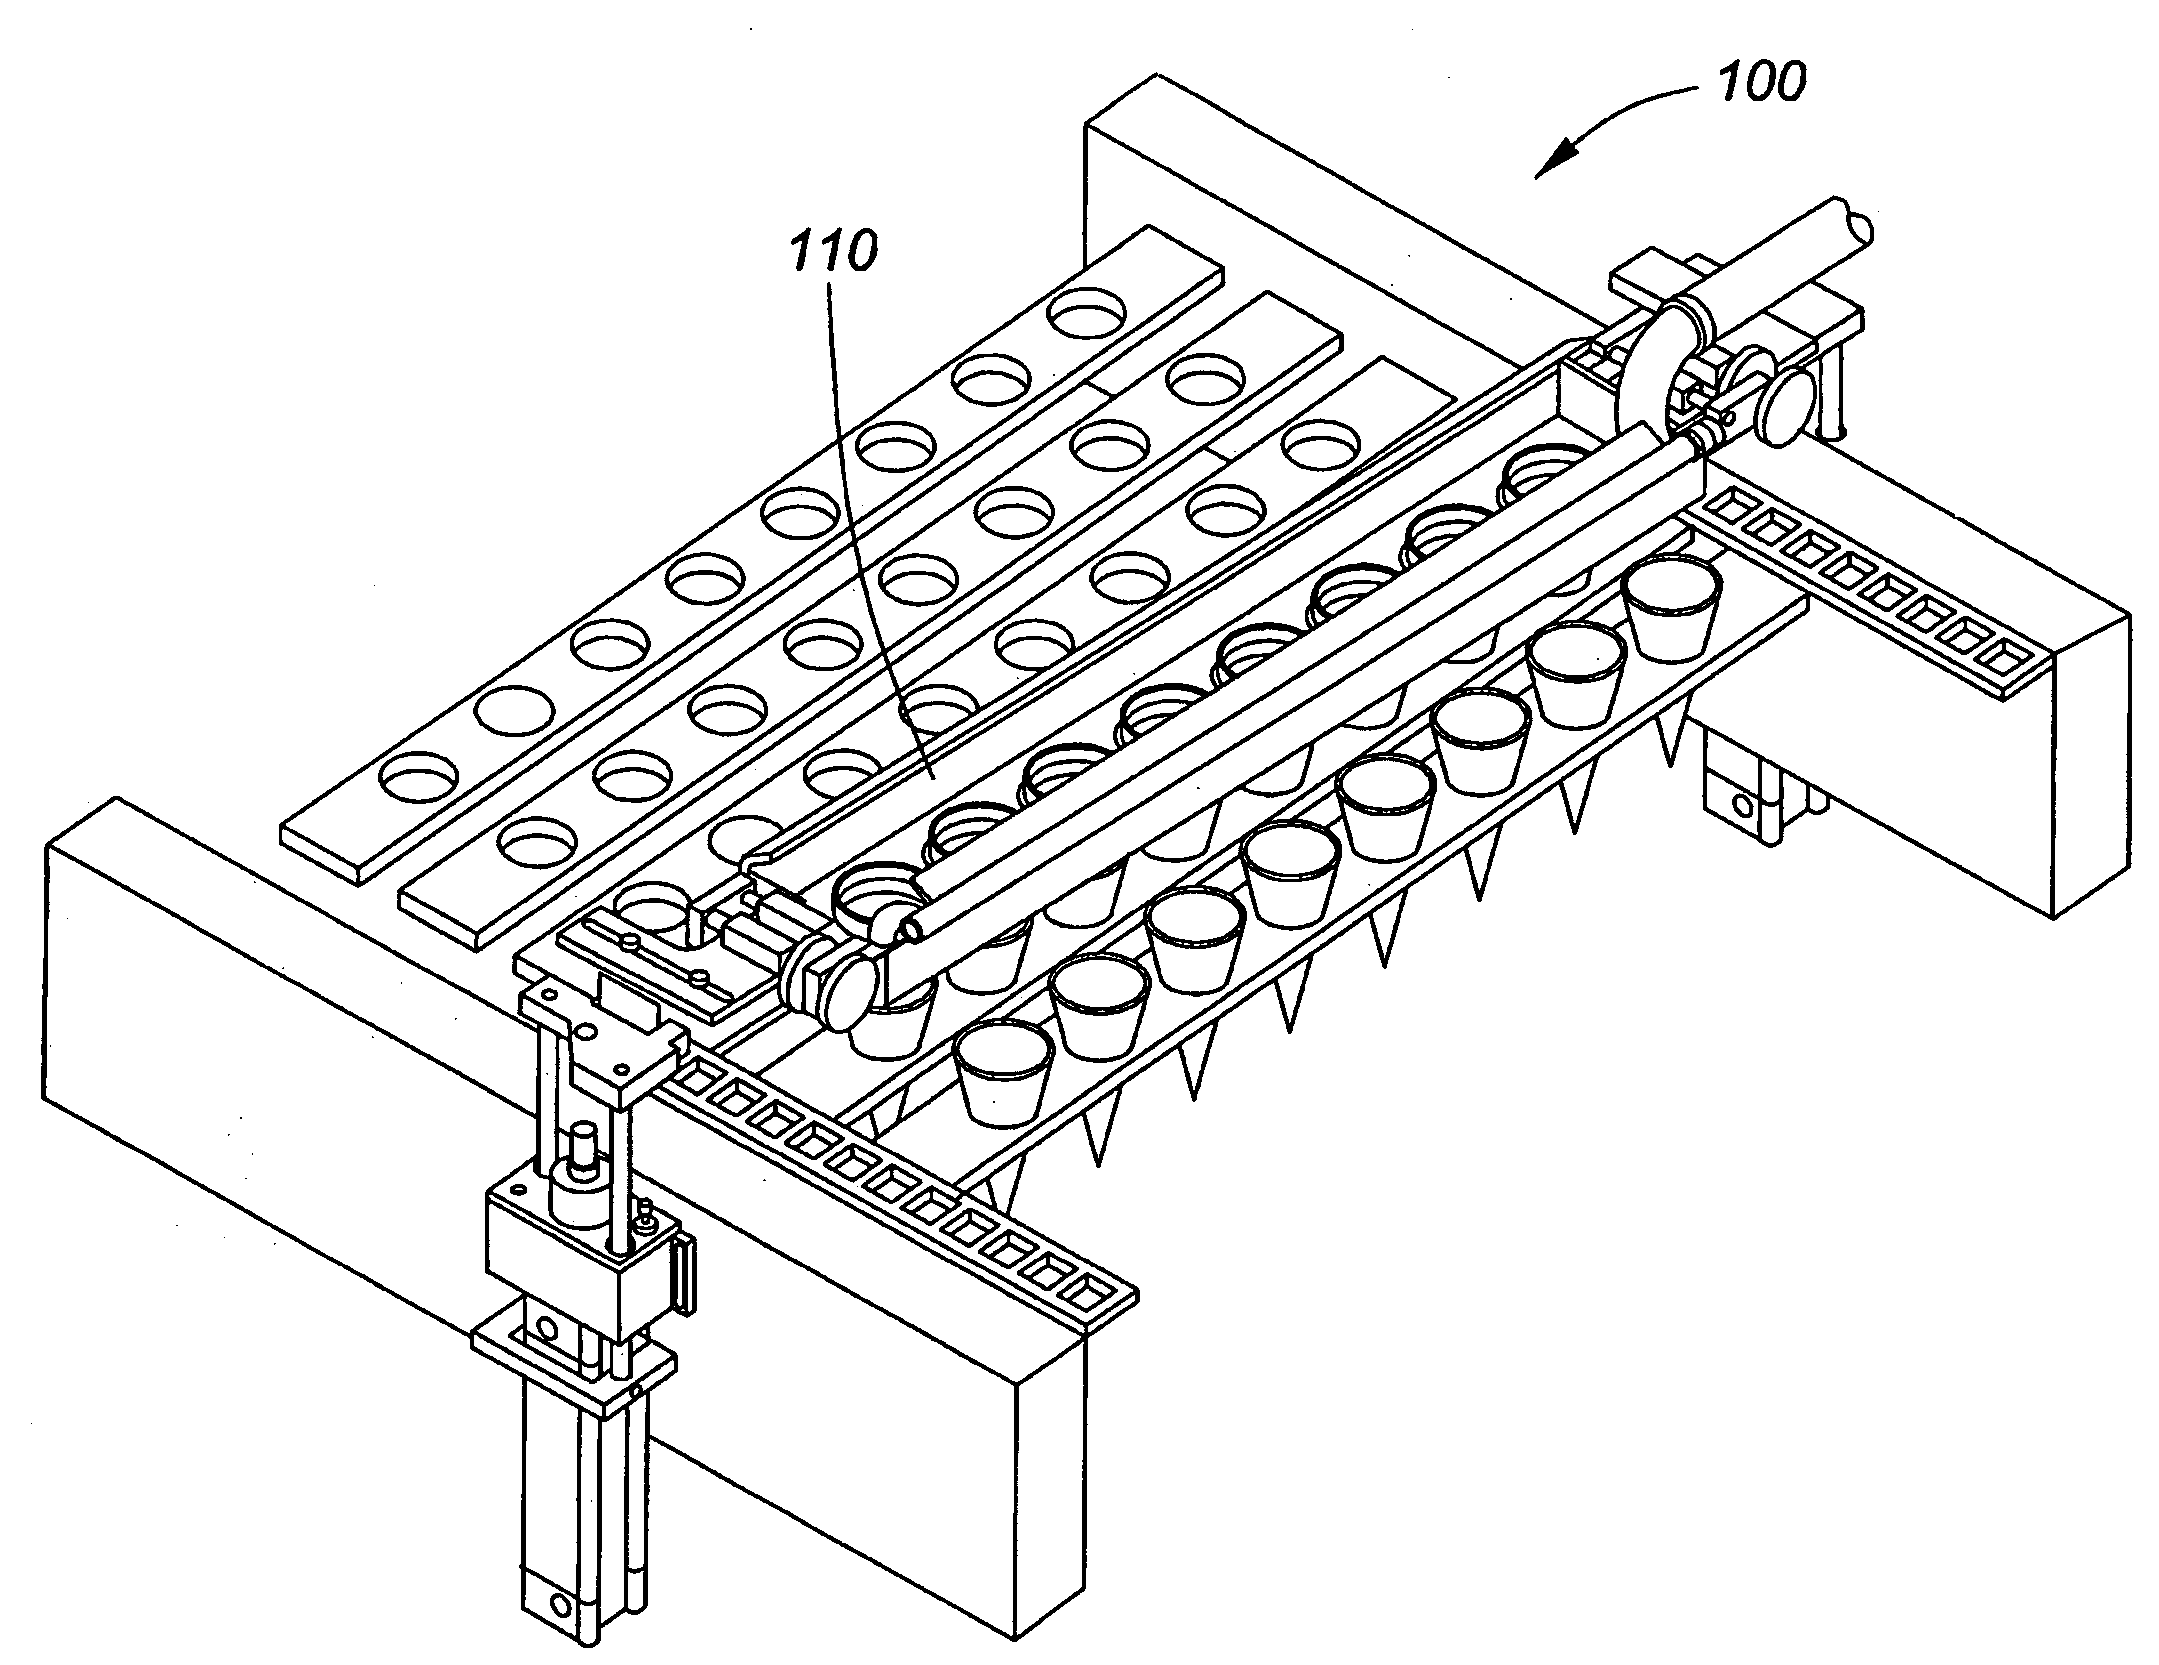 Method, apparatus, and system for coating food items